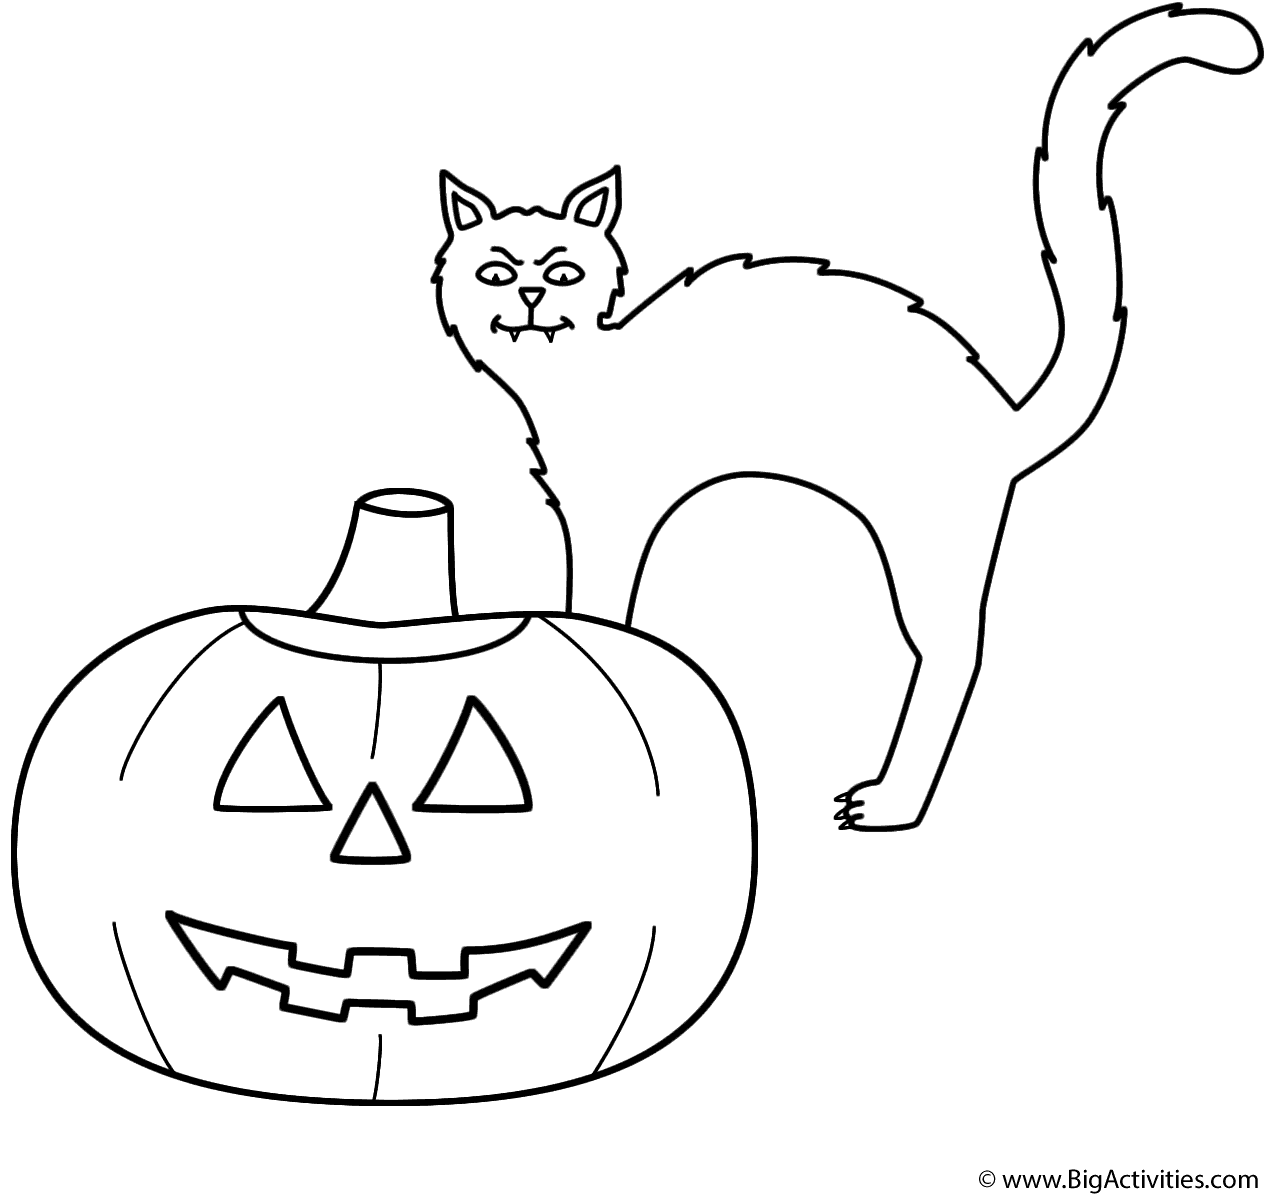 Pumpkin/Jack-o-Lantern with black cat - Coloring Page ...